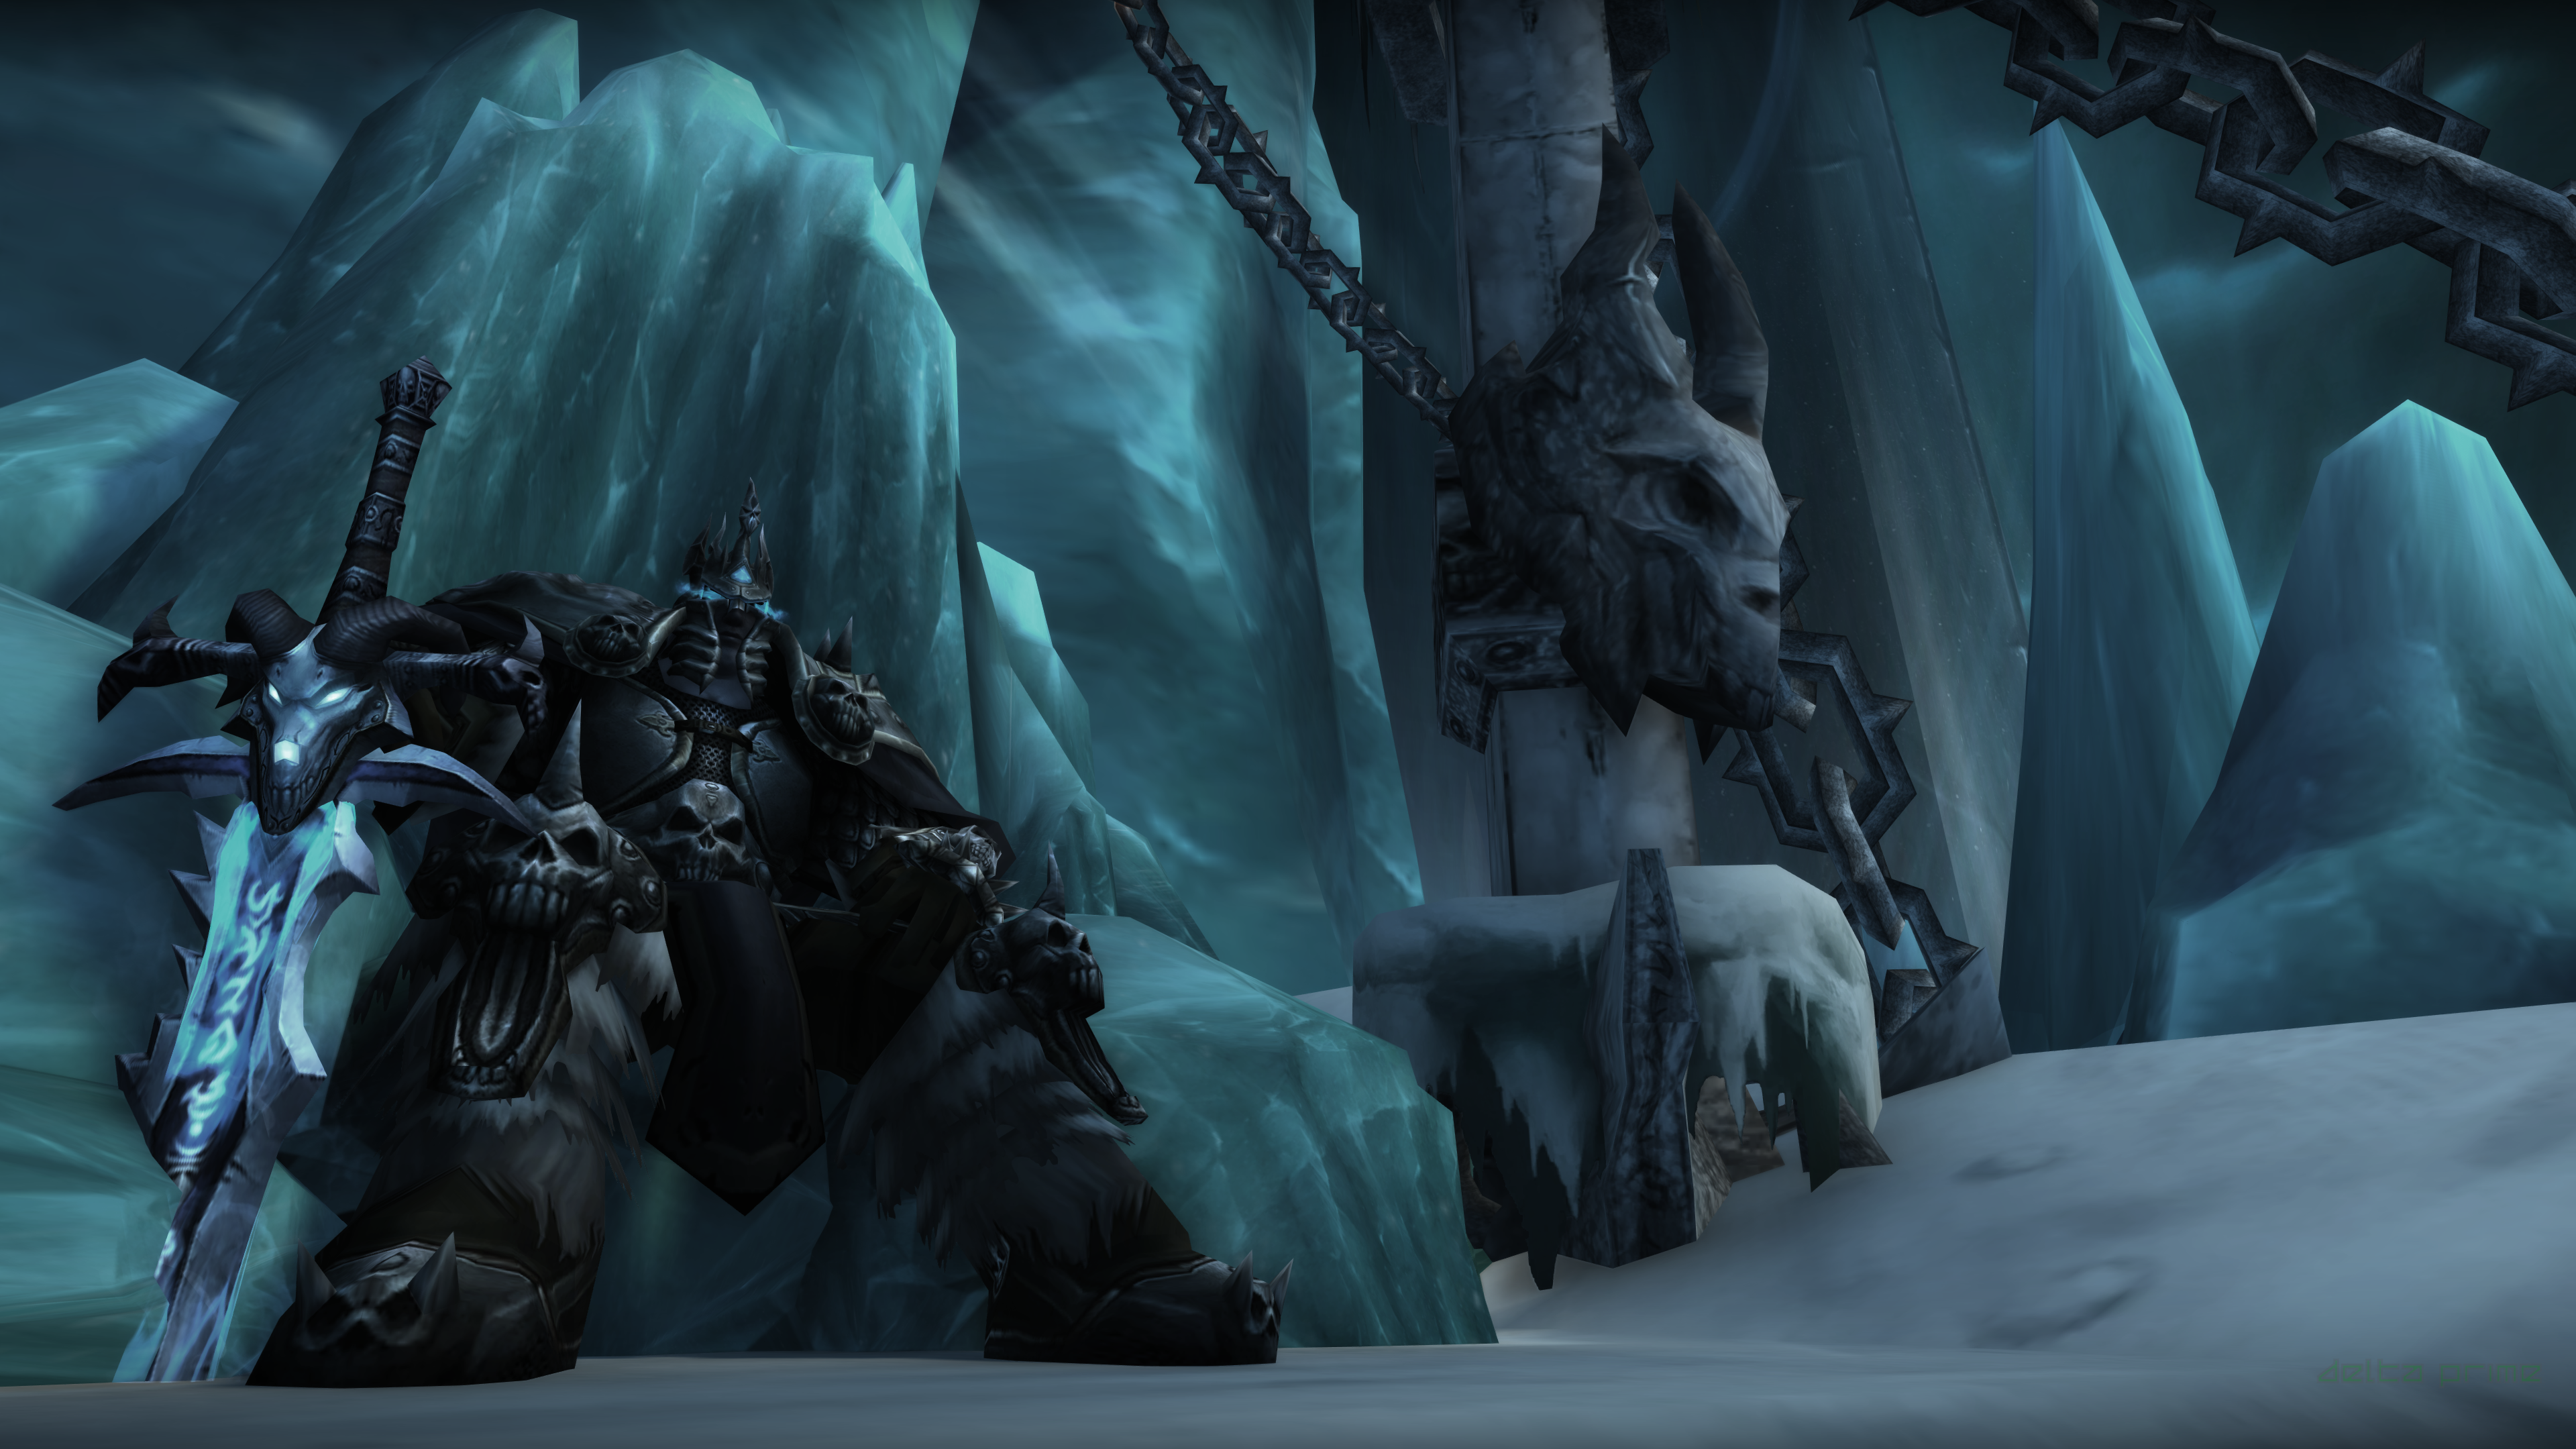 World Of Warcraft Wrath Of The Lich King Arthas Menethil The Lich King Icecrown Citadel The Frozen T 3840x2160